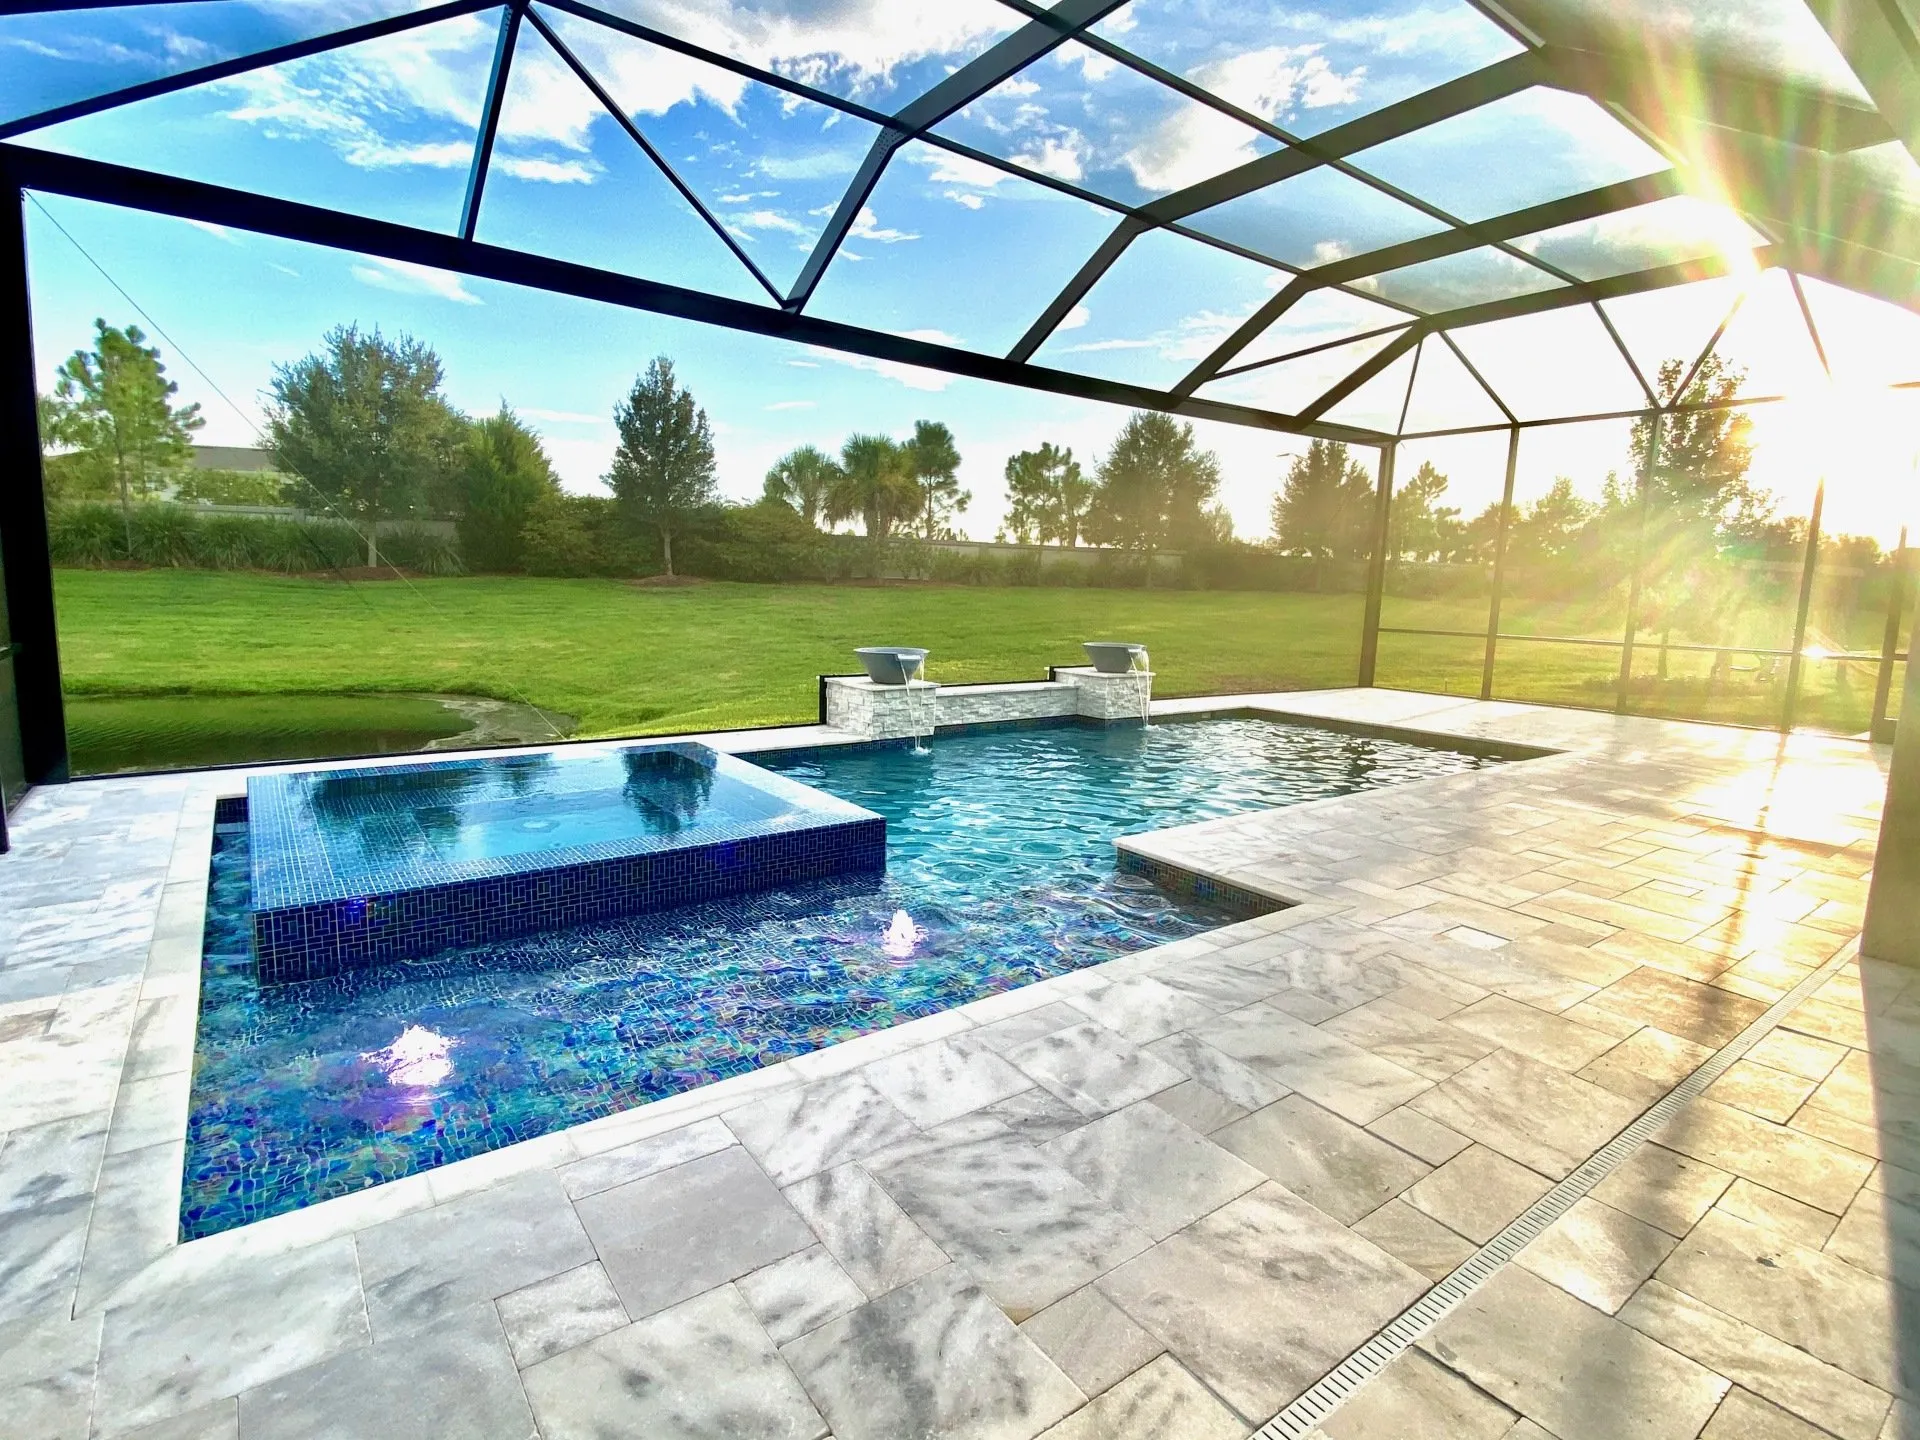 Featured image for “New Pool Construction with Landis”